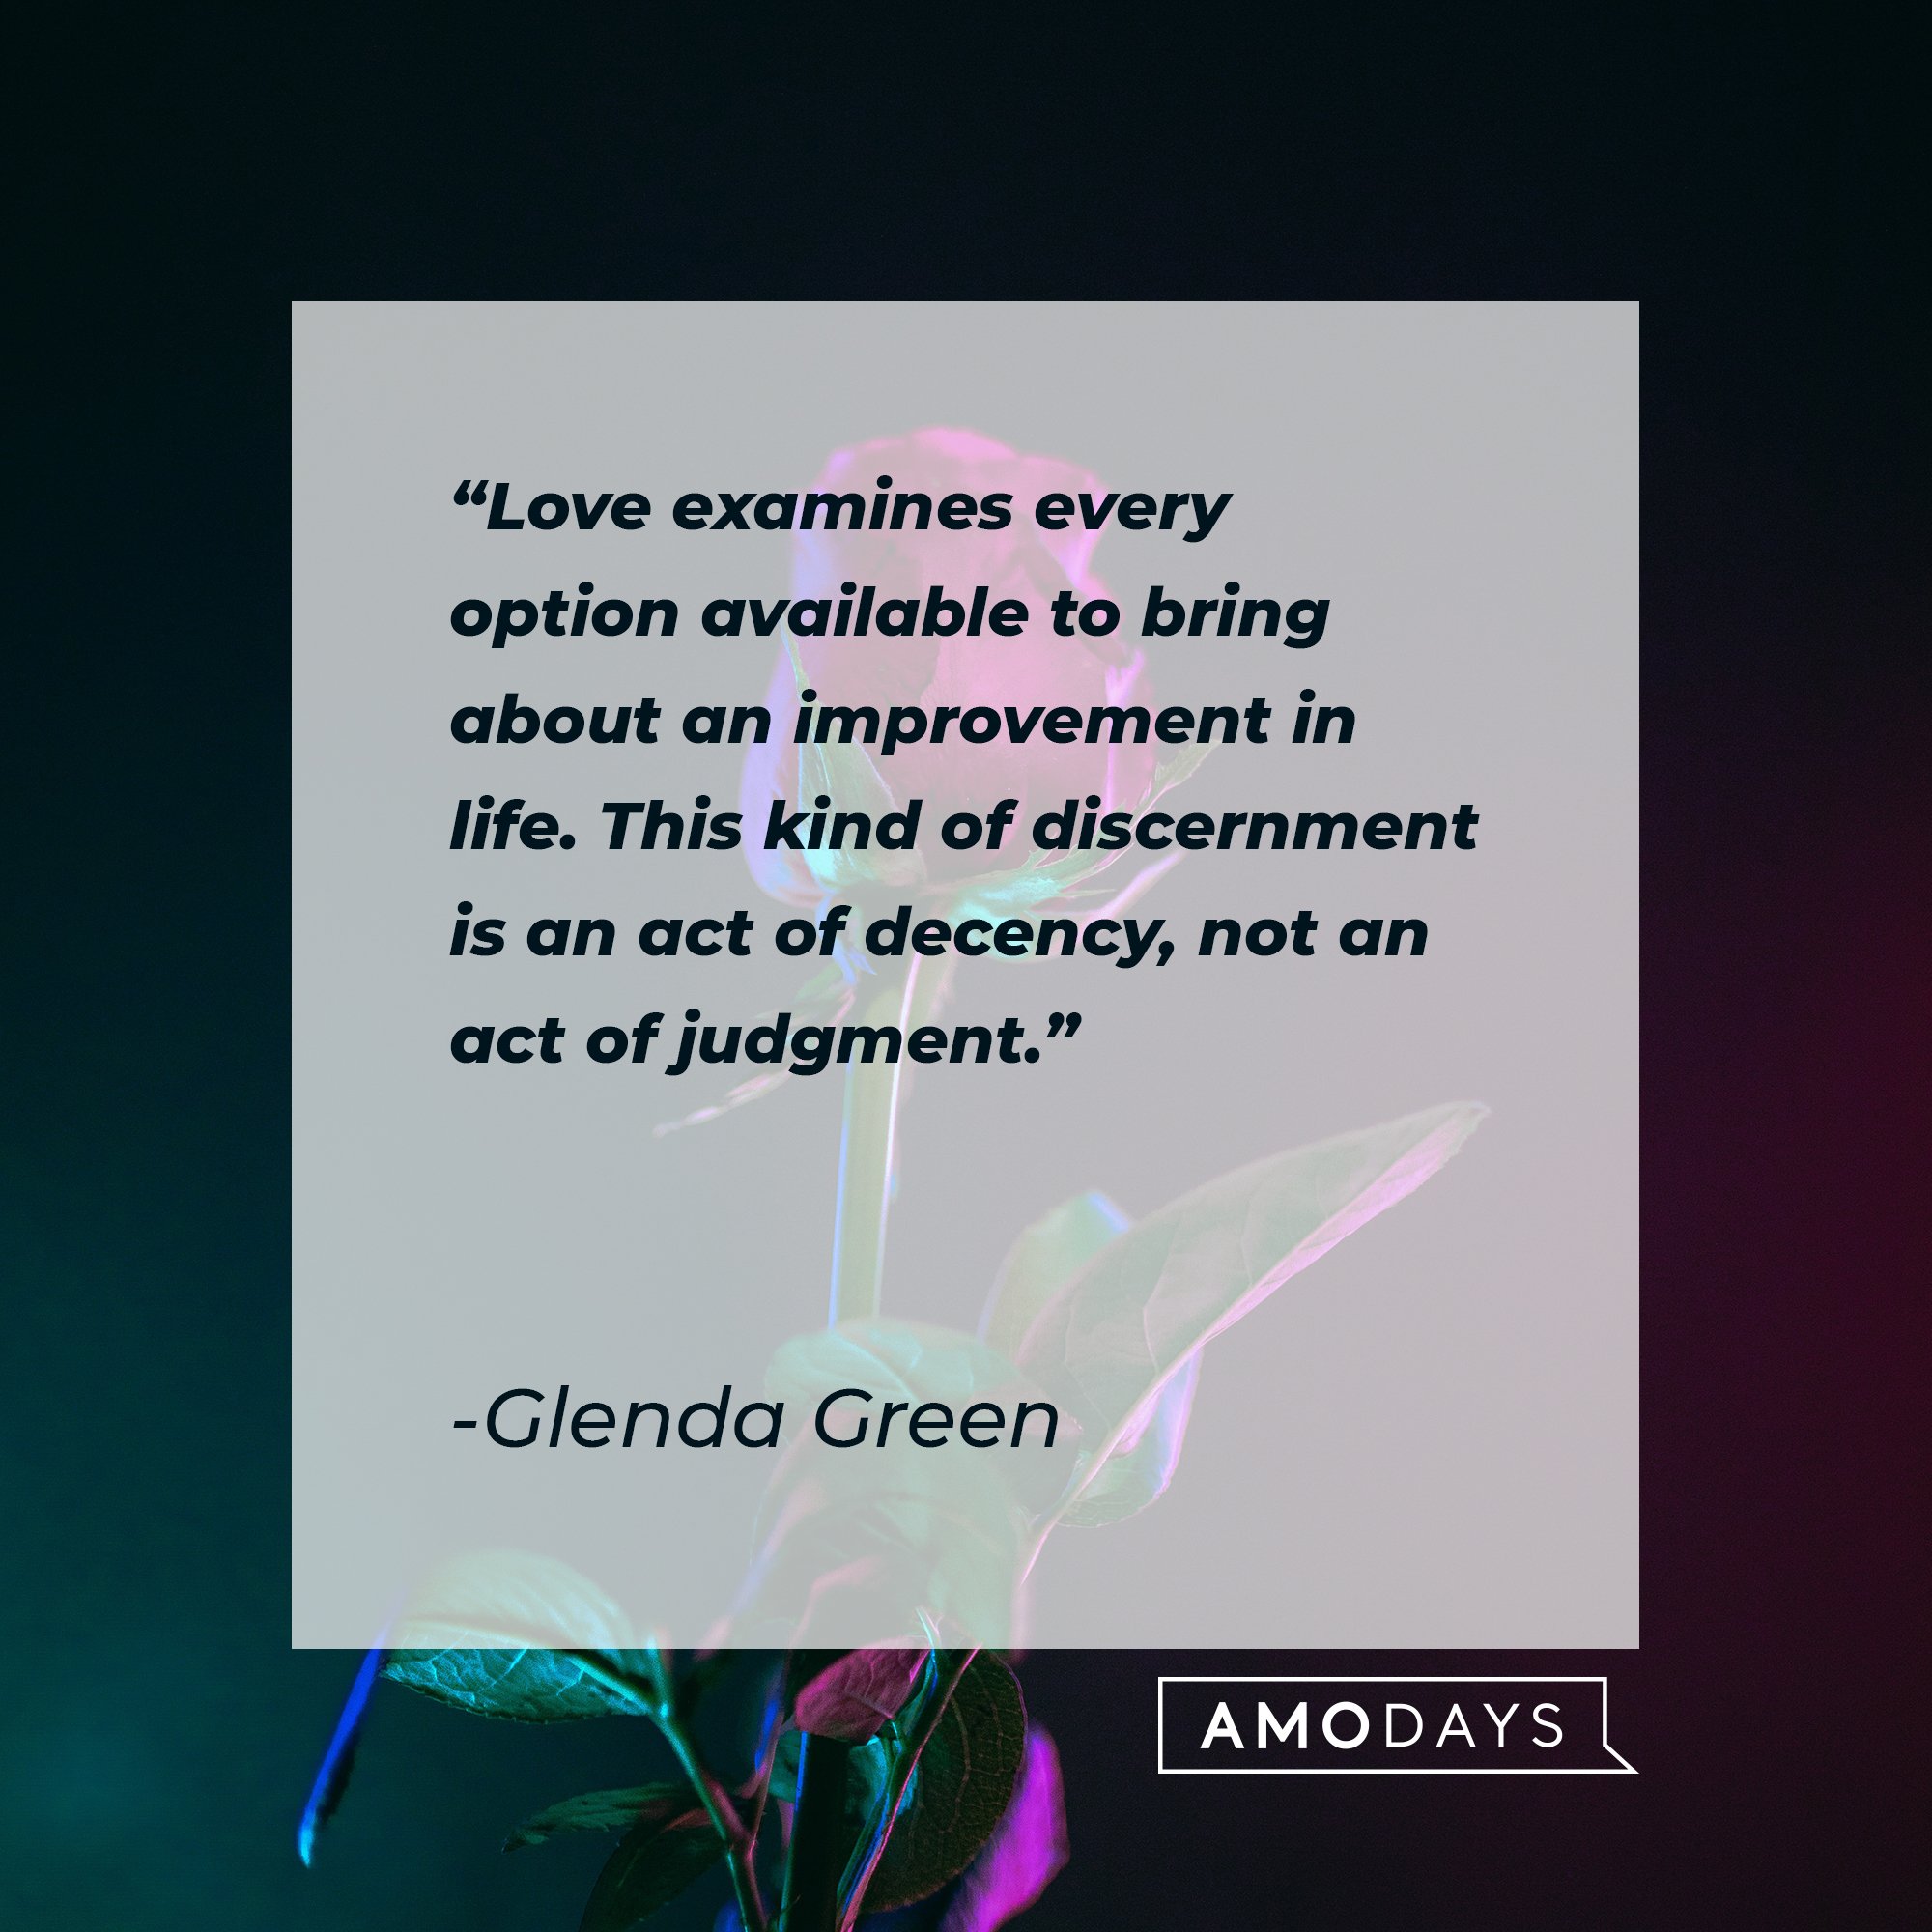 Glenda Green’s quote: "Love examines every option available to bring about an improvement in life. This kind of discernment is an act of decency, not an act of judgment." | Image: AmoDays